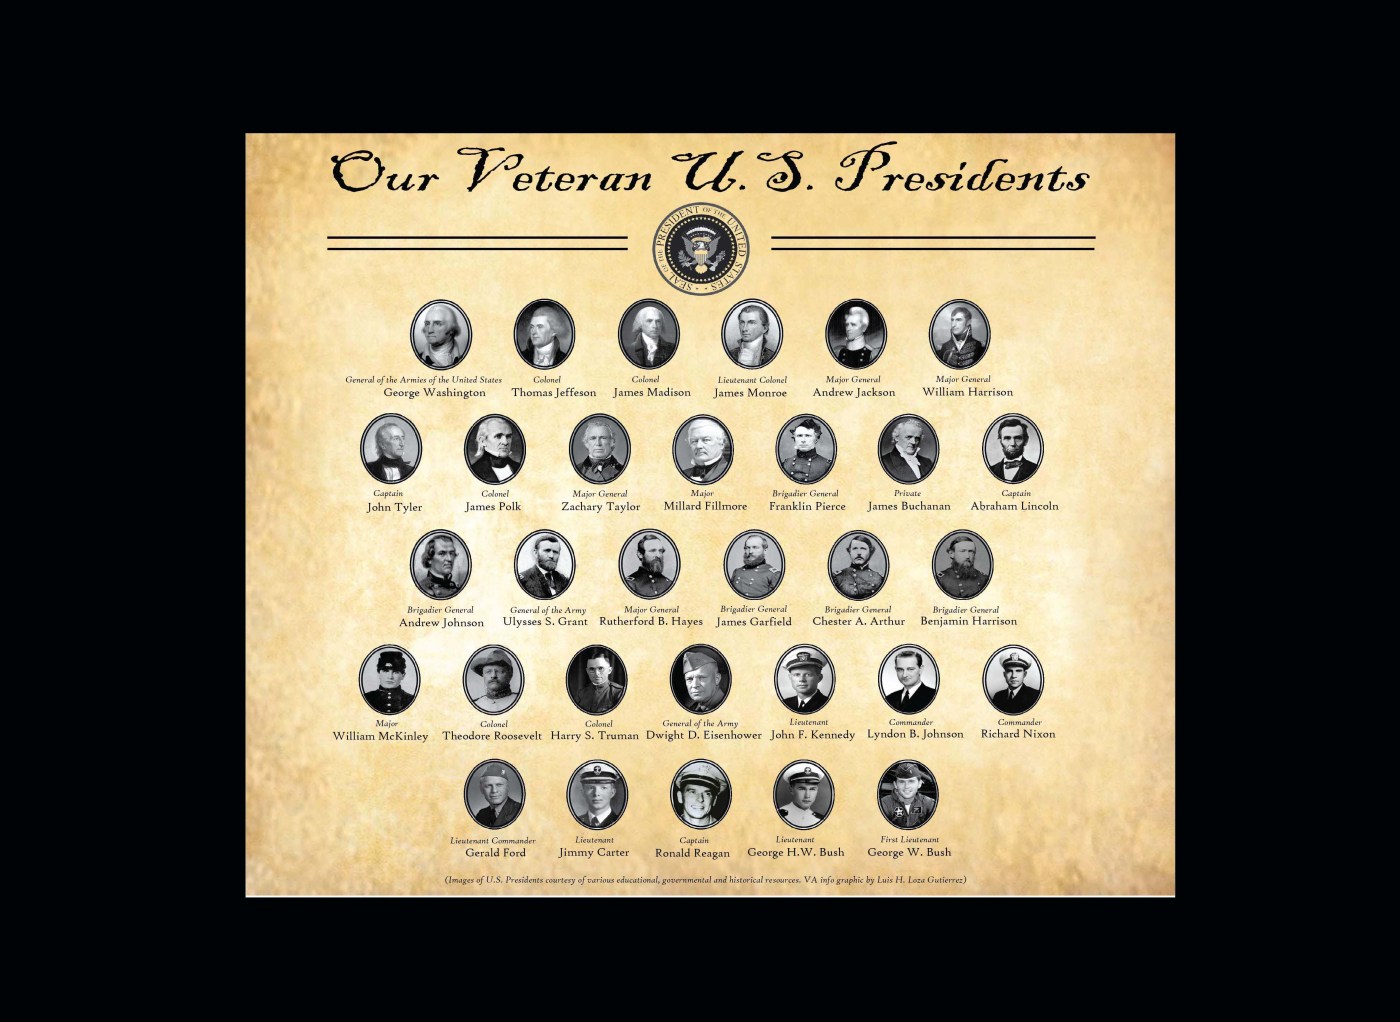 Diagram of Veteran U.S. Presidents with highest obtained rank, starting from the first to most recent president to have served. Thirty-one of the 45 U.S. presidents have served in the U.S. armed forces. (Presidential images courtesy of various educational, governmental and historical public sources. VA info graphic by Luis H. Loza Gutierrez)